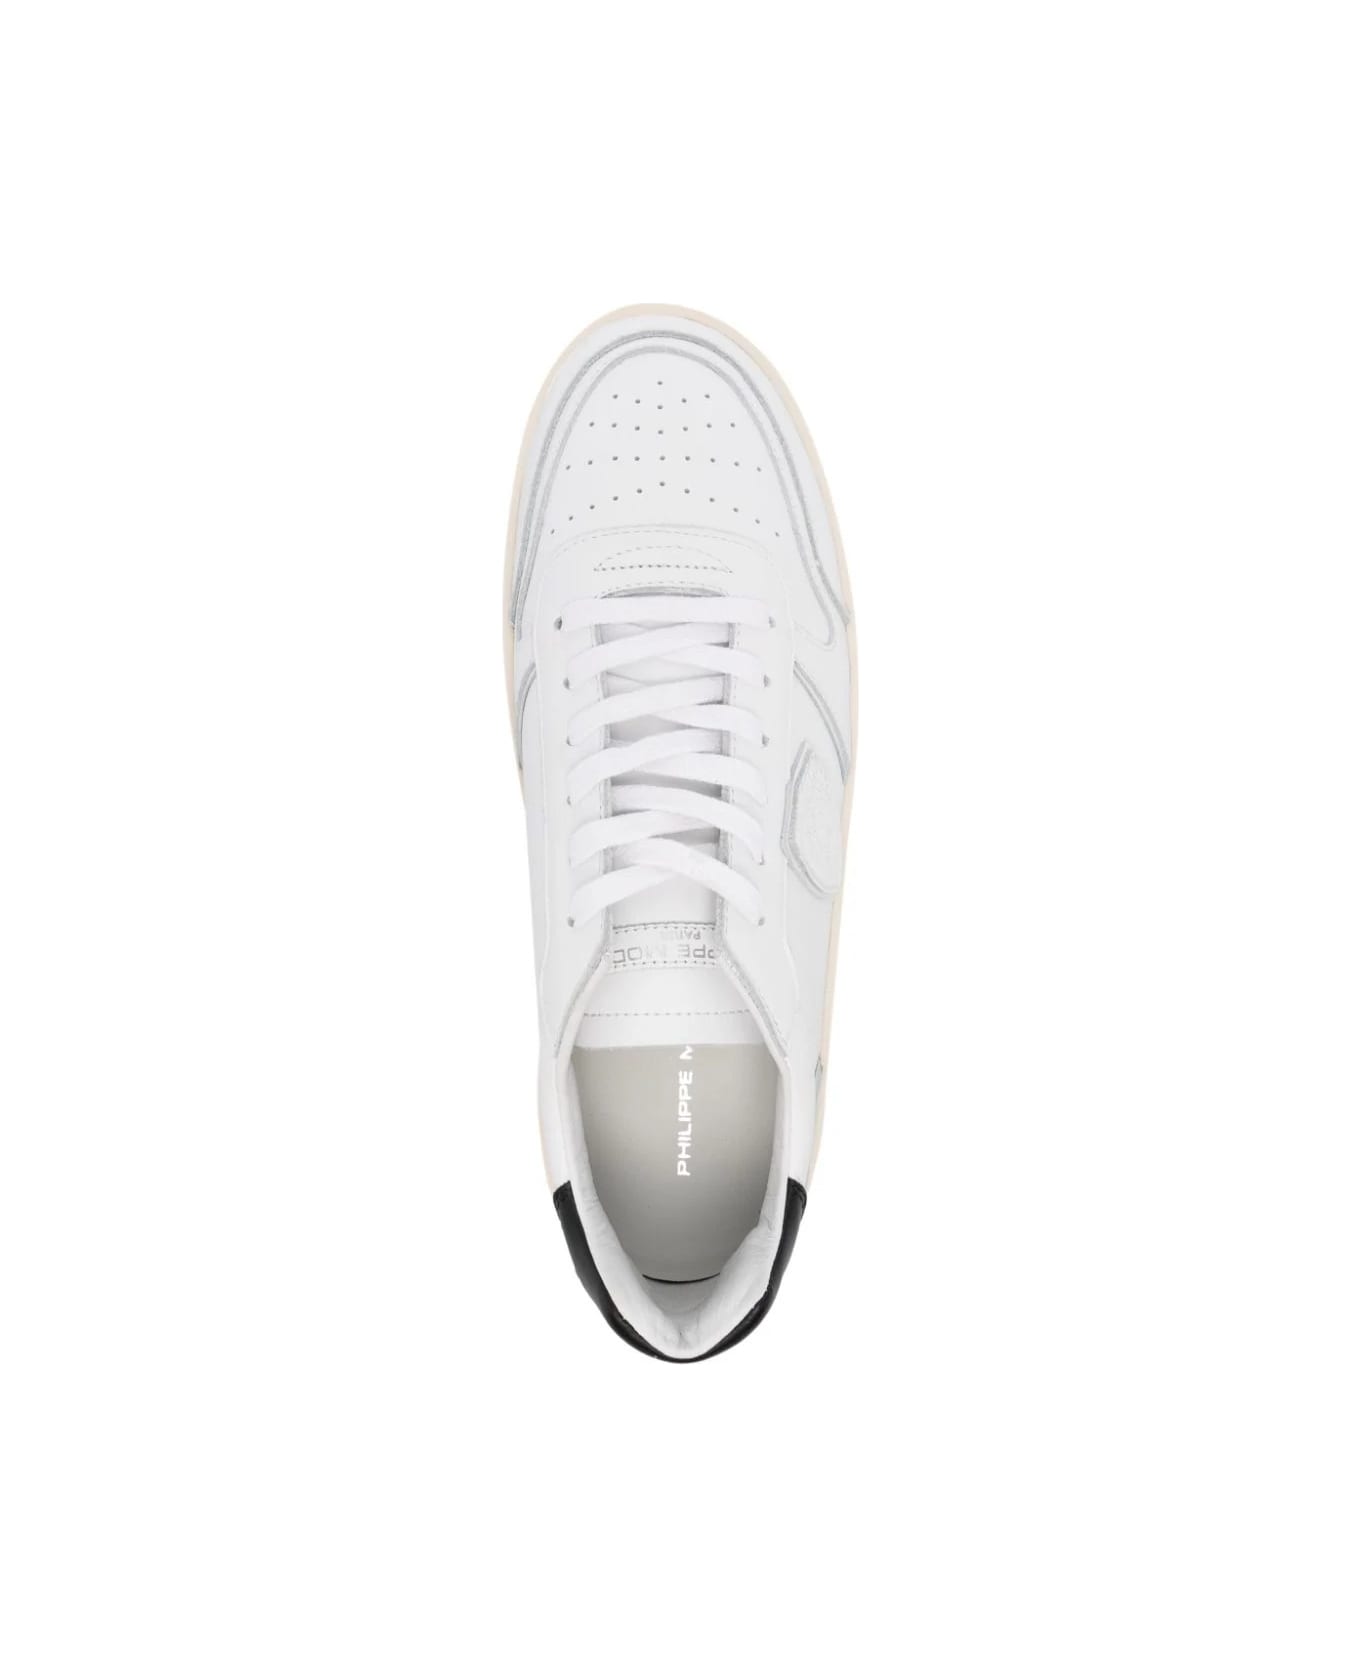 Philippe Model Nice Low Sneakers - White And Black - White